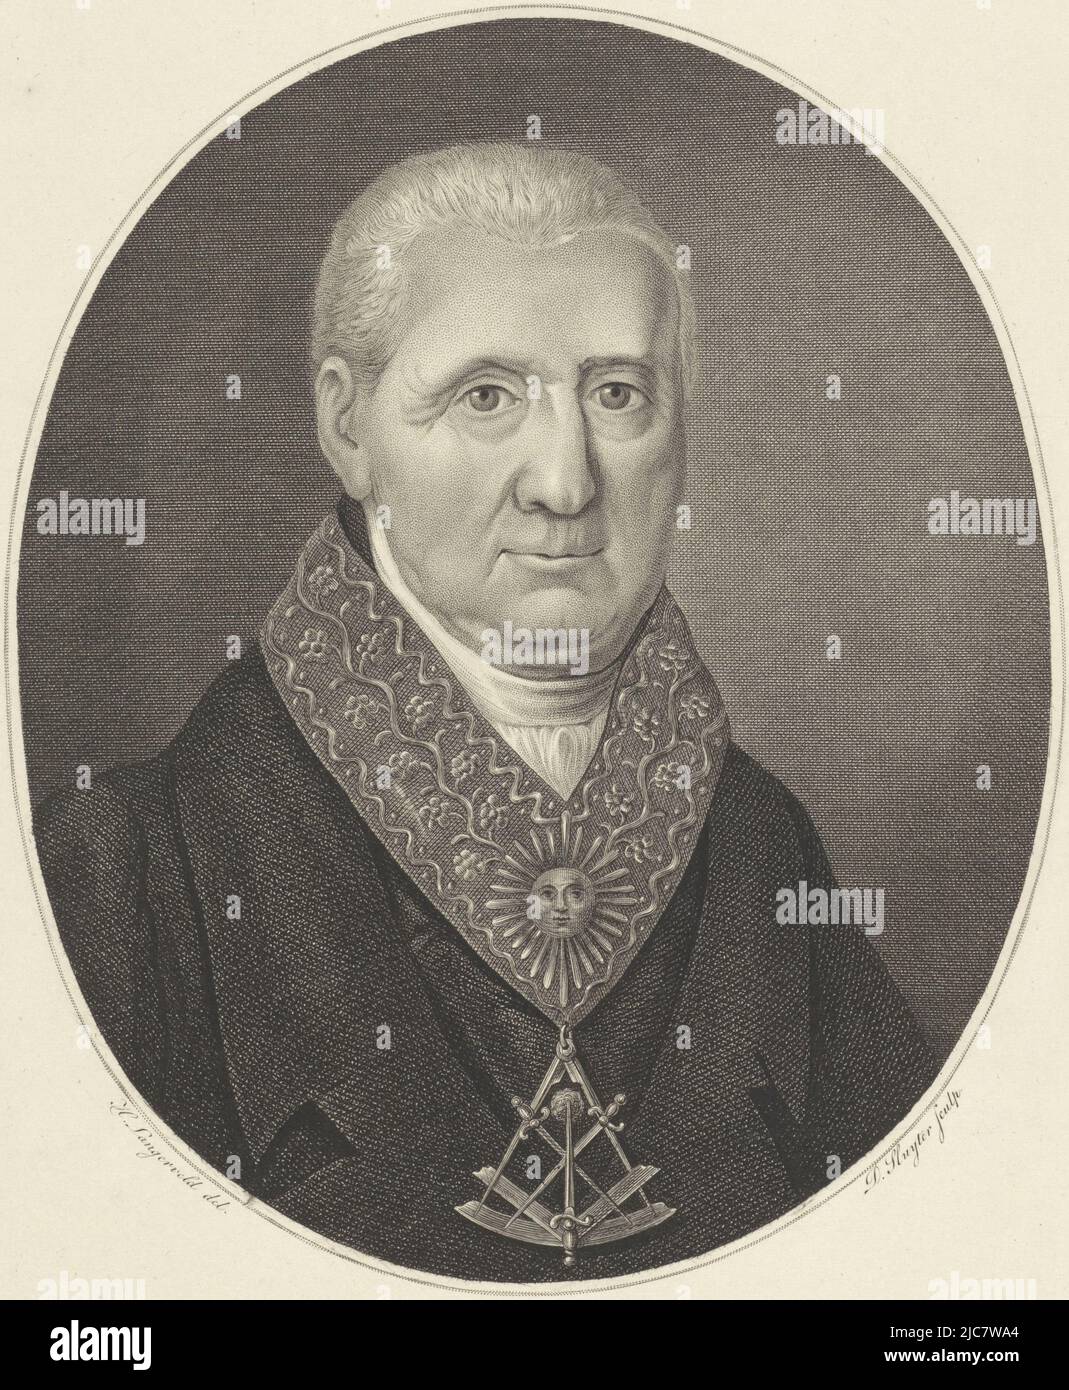 Portrait of Freemason Hagen, print maker: Dirk Sluyter, (mentioned on object), intermediary draughtsman: Harmanus Langerveld, (mentioned on object), A.G. Calmer, (mentioned on object), print maker: Amsterdam, intermediary draughtsman: Amsterdam, publisher: The Hague, 1828, paper, etching, engraving, h 392 mm × w 287 mm Stock Photo